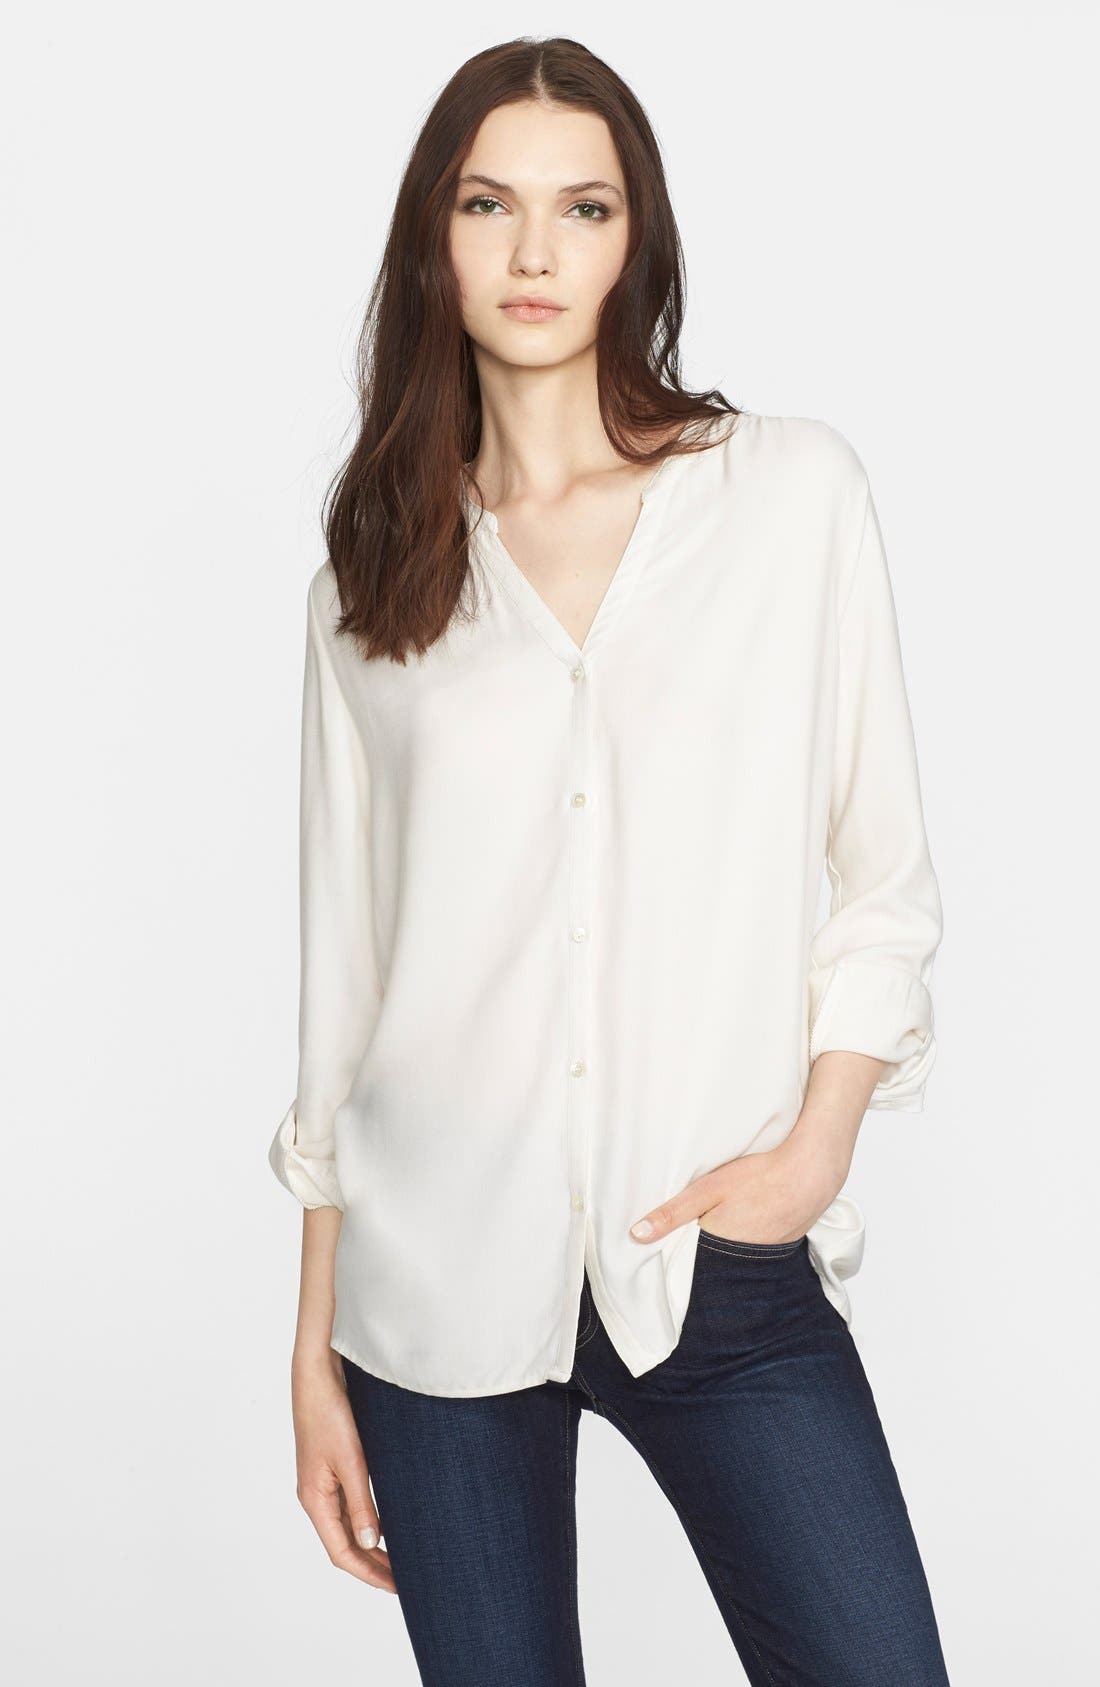 soft joie top